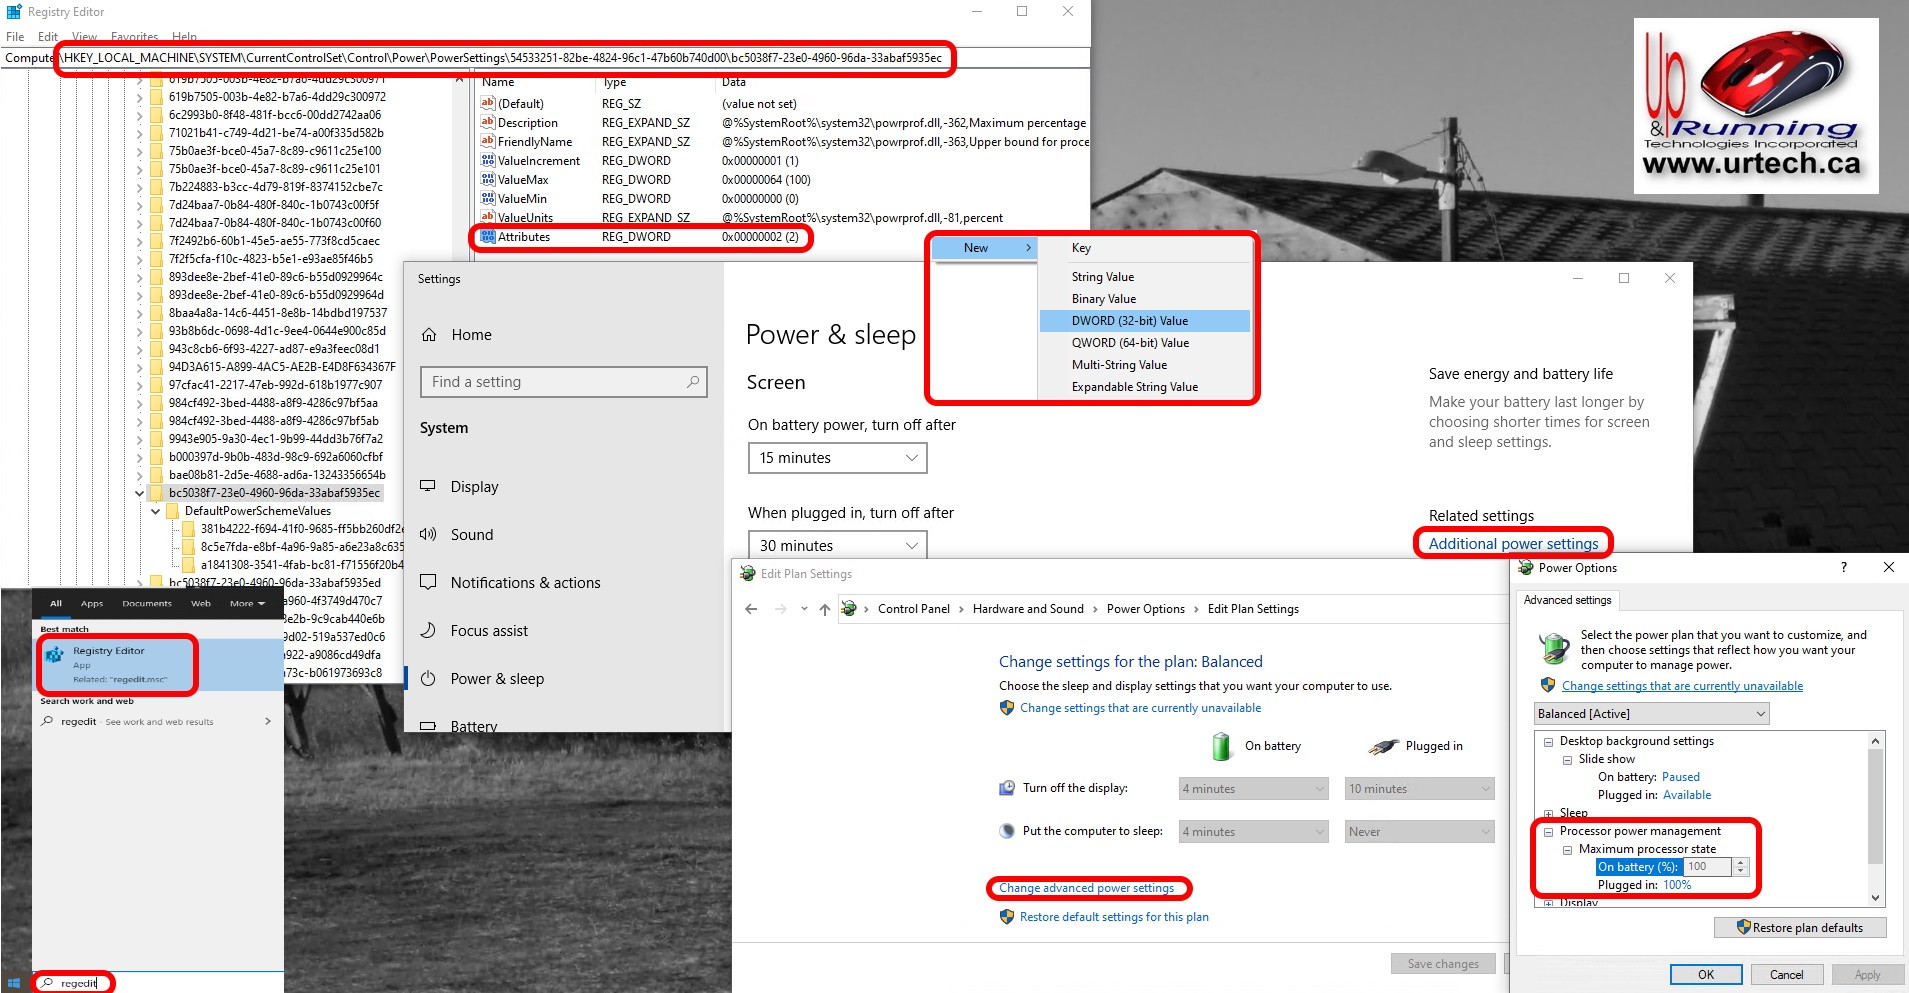 dauw dienen getrouwd SOLVED: Missing Processor Power Management Settings Option In Advanced Power  Options | Up & Running Technologies, Tech How To's